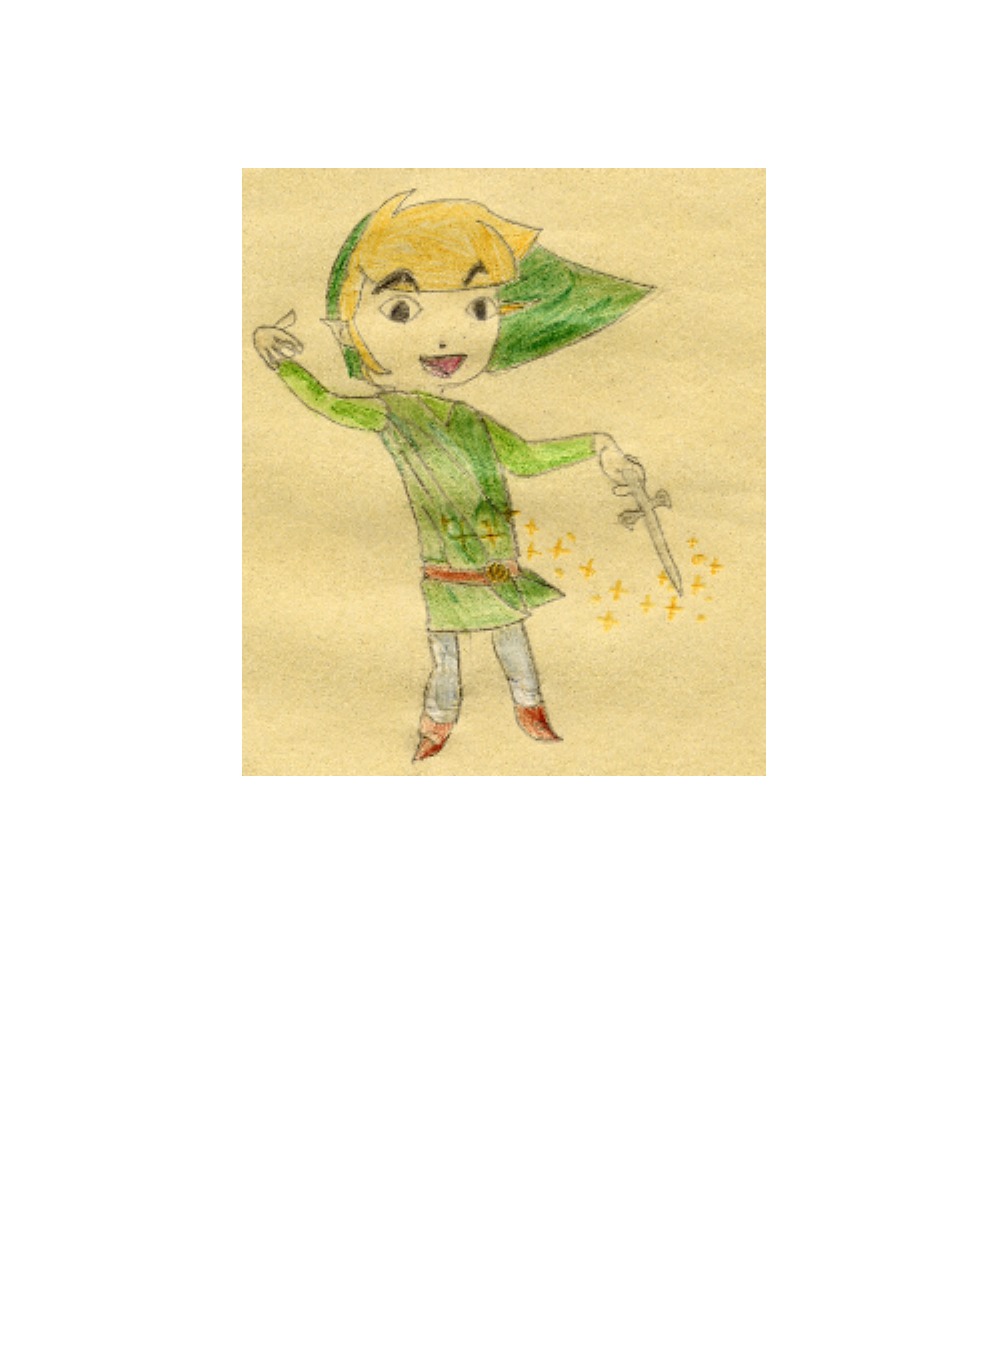 Link Playing Windwaker by Song_of_a_Phoenix